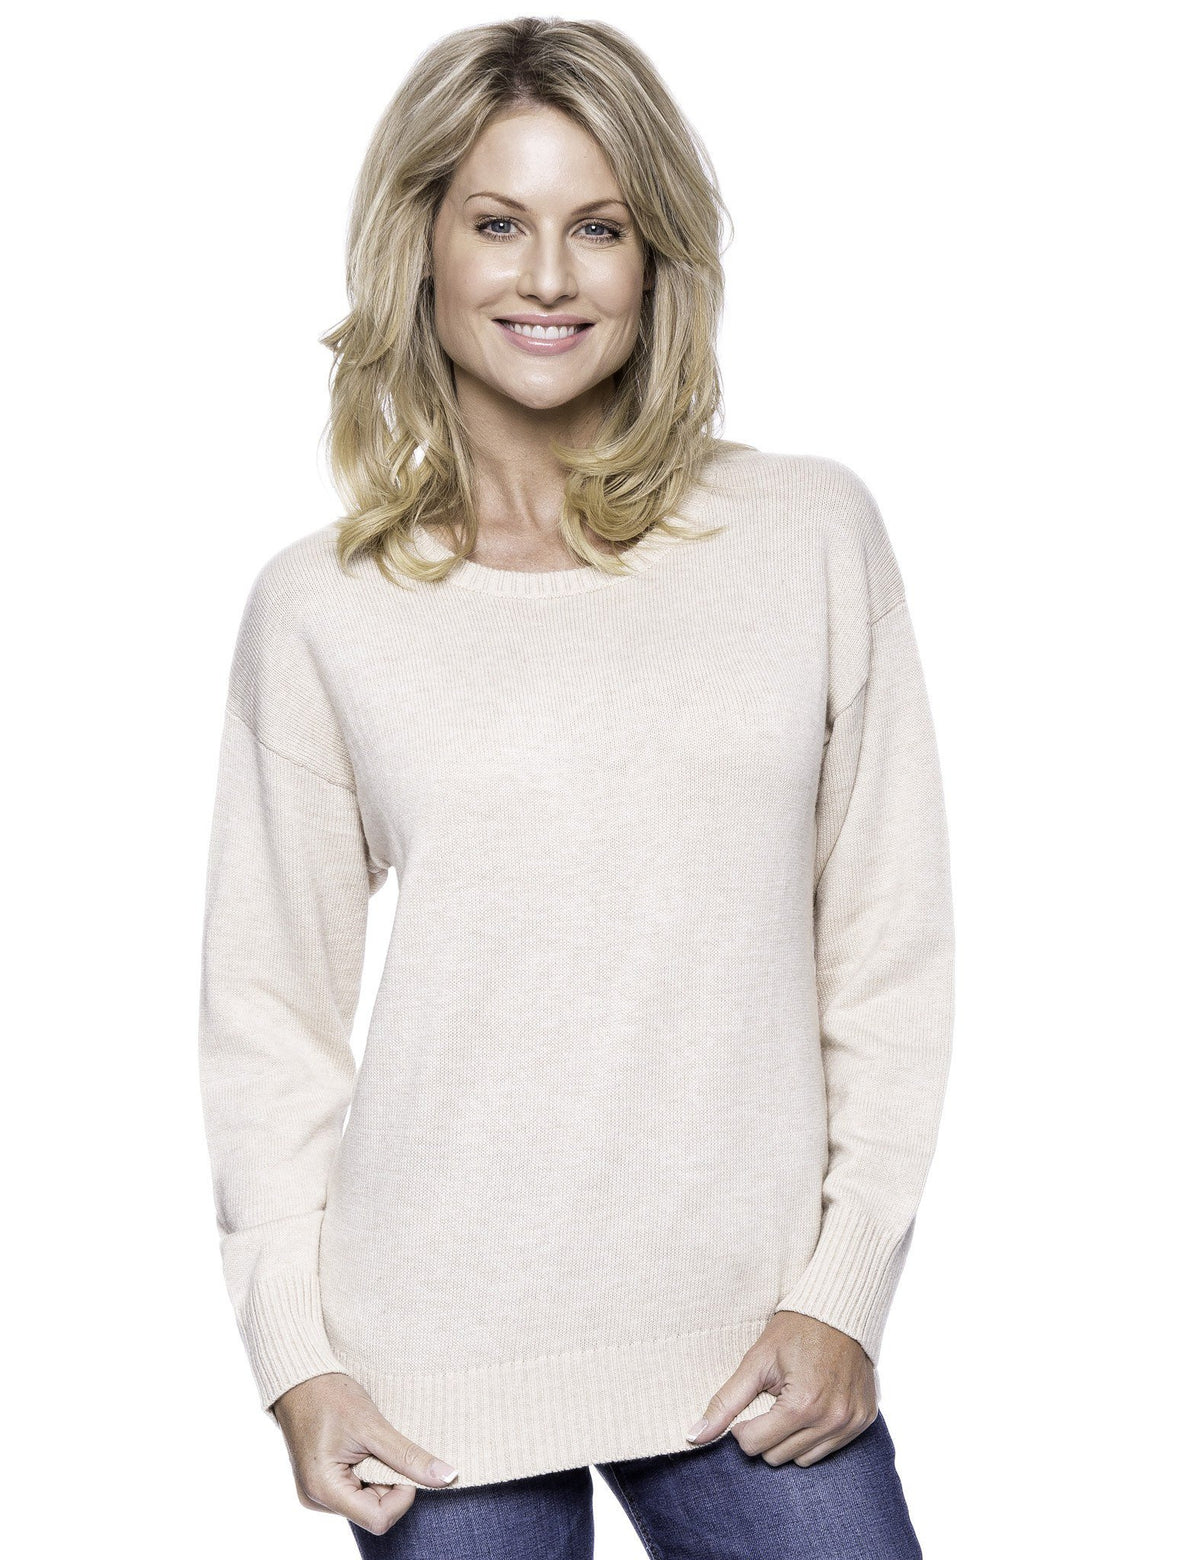 Women's Cashmere Blend Crew Neck Sweater with Drop Shoulder - Oatmeal